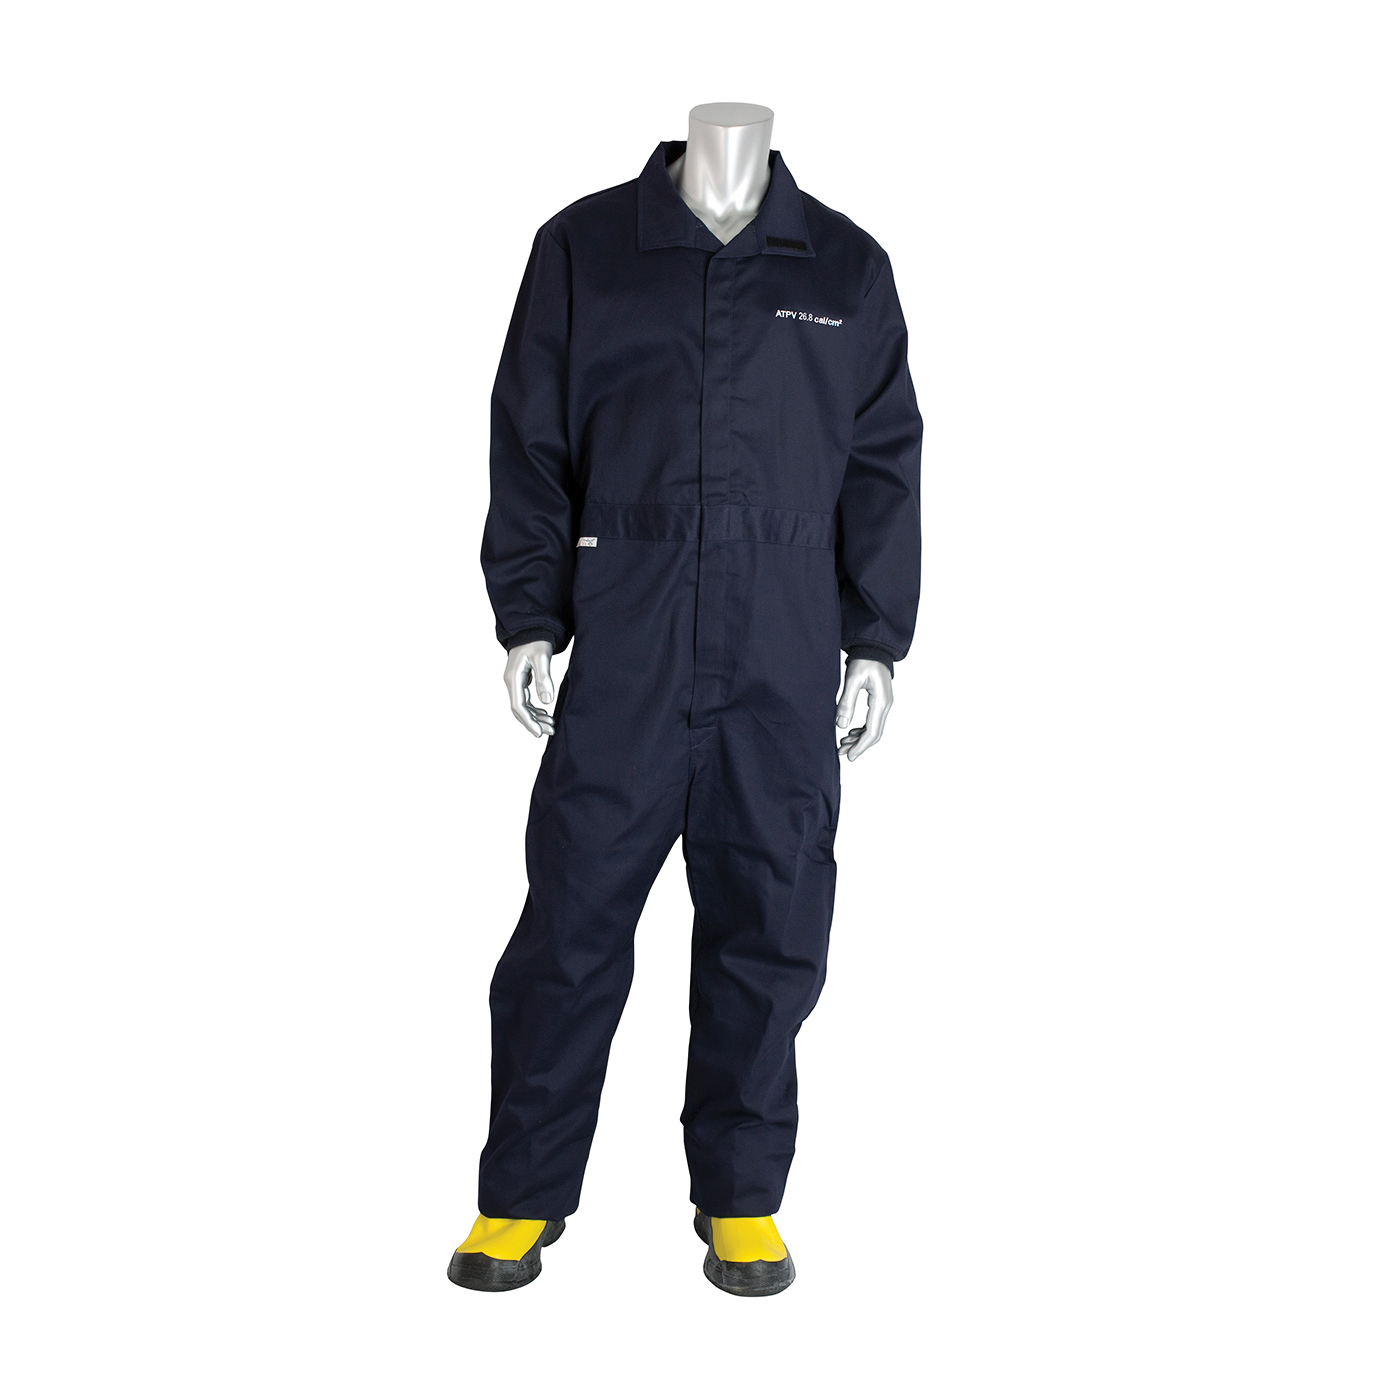 PIP® 9100-52772/6XL Flame Resistant Coverall, 6XL, Navy, Westex® Ultra Soft®/88% Cotton/12% Nylon, 68 to 70 in Chest, 32 in L Inseam